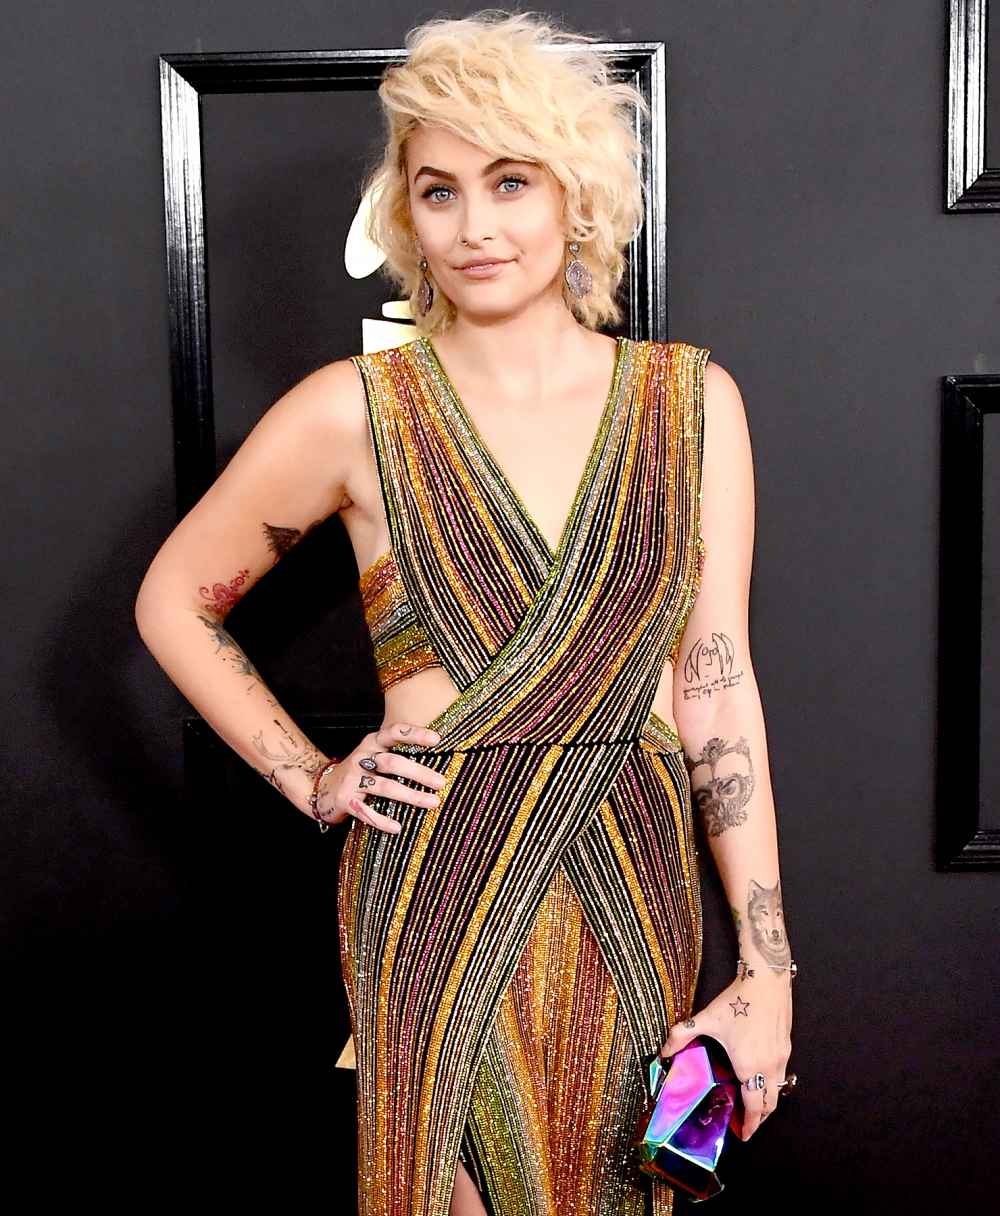 Paris Jackson attends The 59th GRAMMY Awards at STAPLES Center on February 12, 2017 in Los Angeles, California.